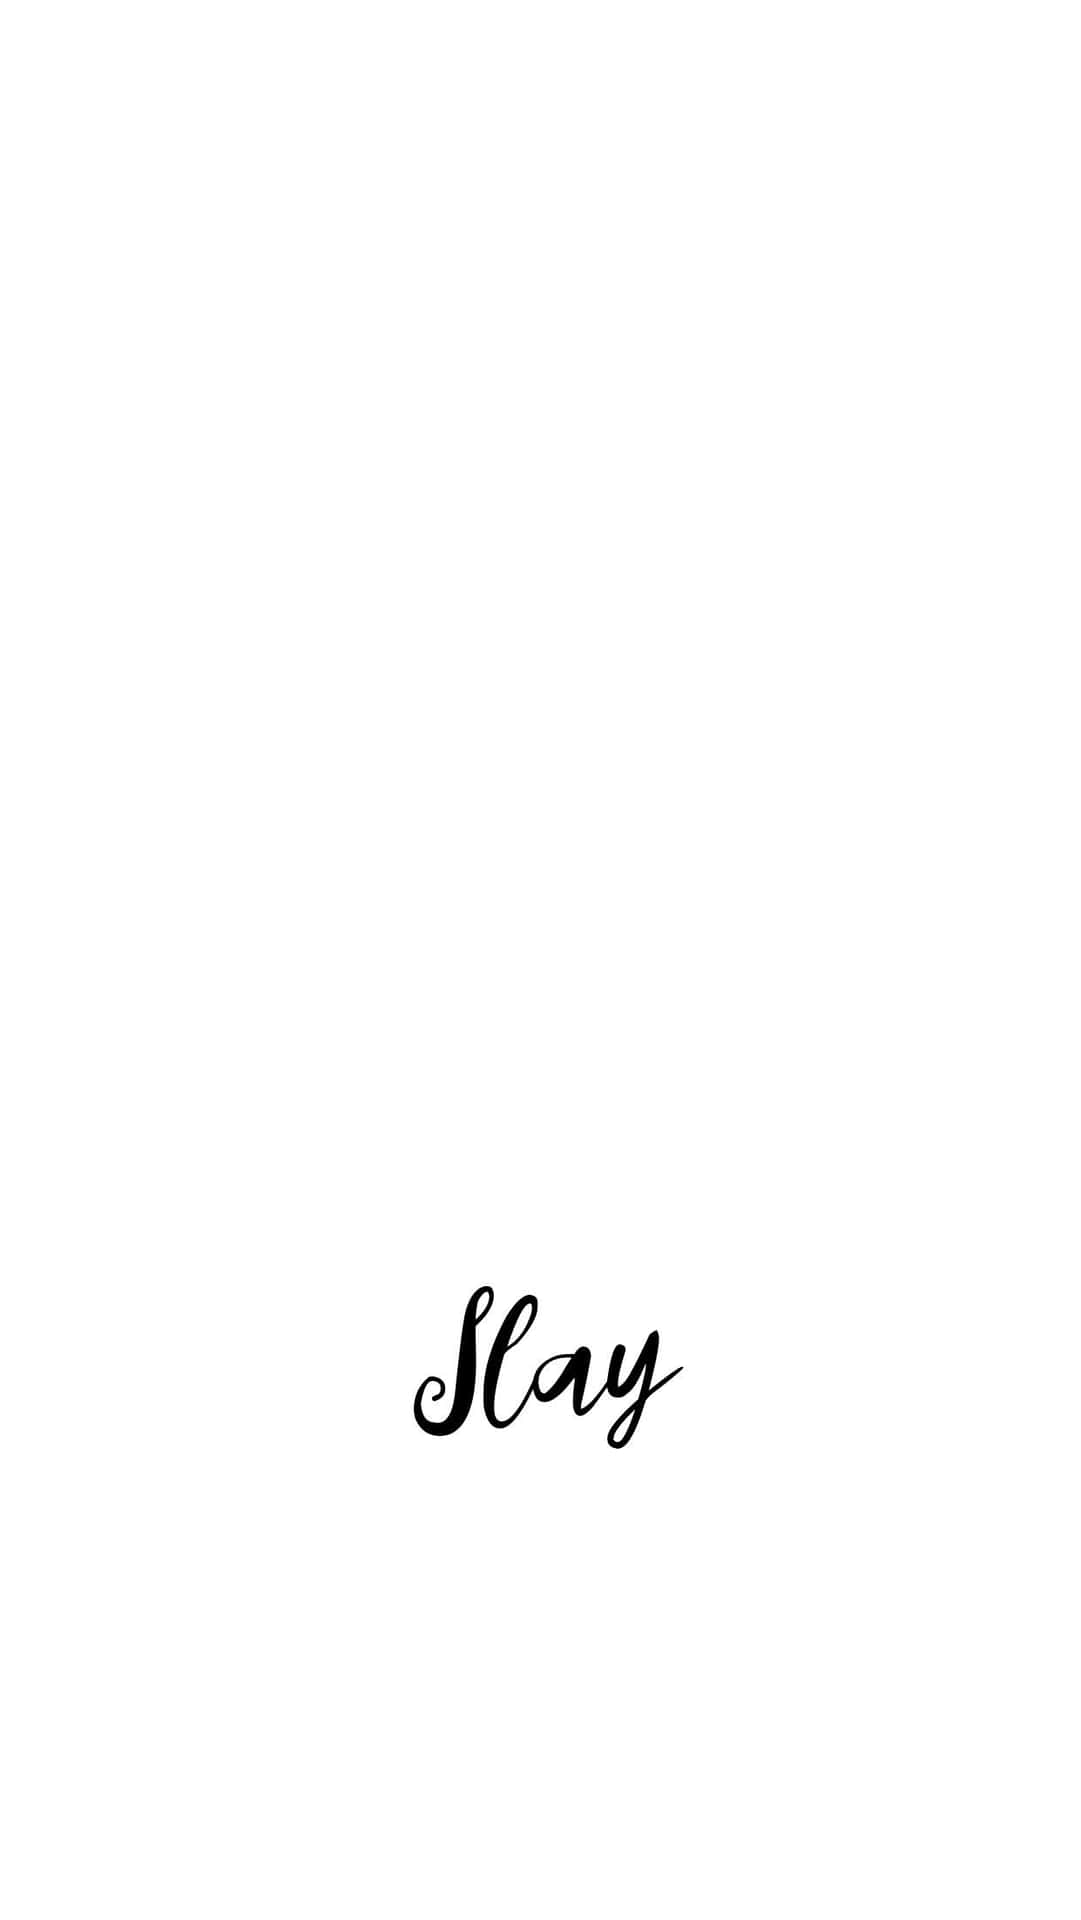 A Black And White Image Of The Word Slay